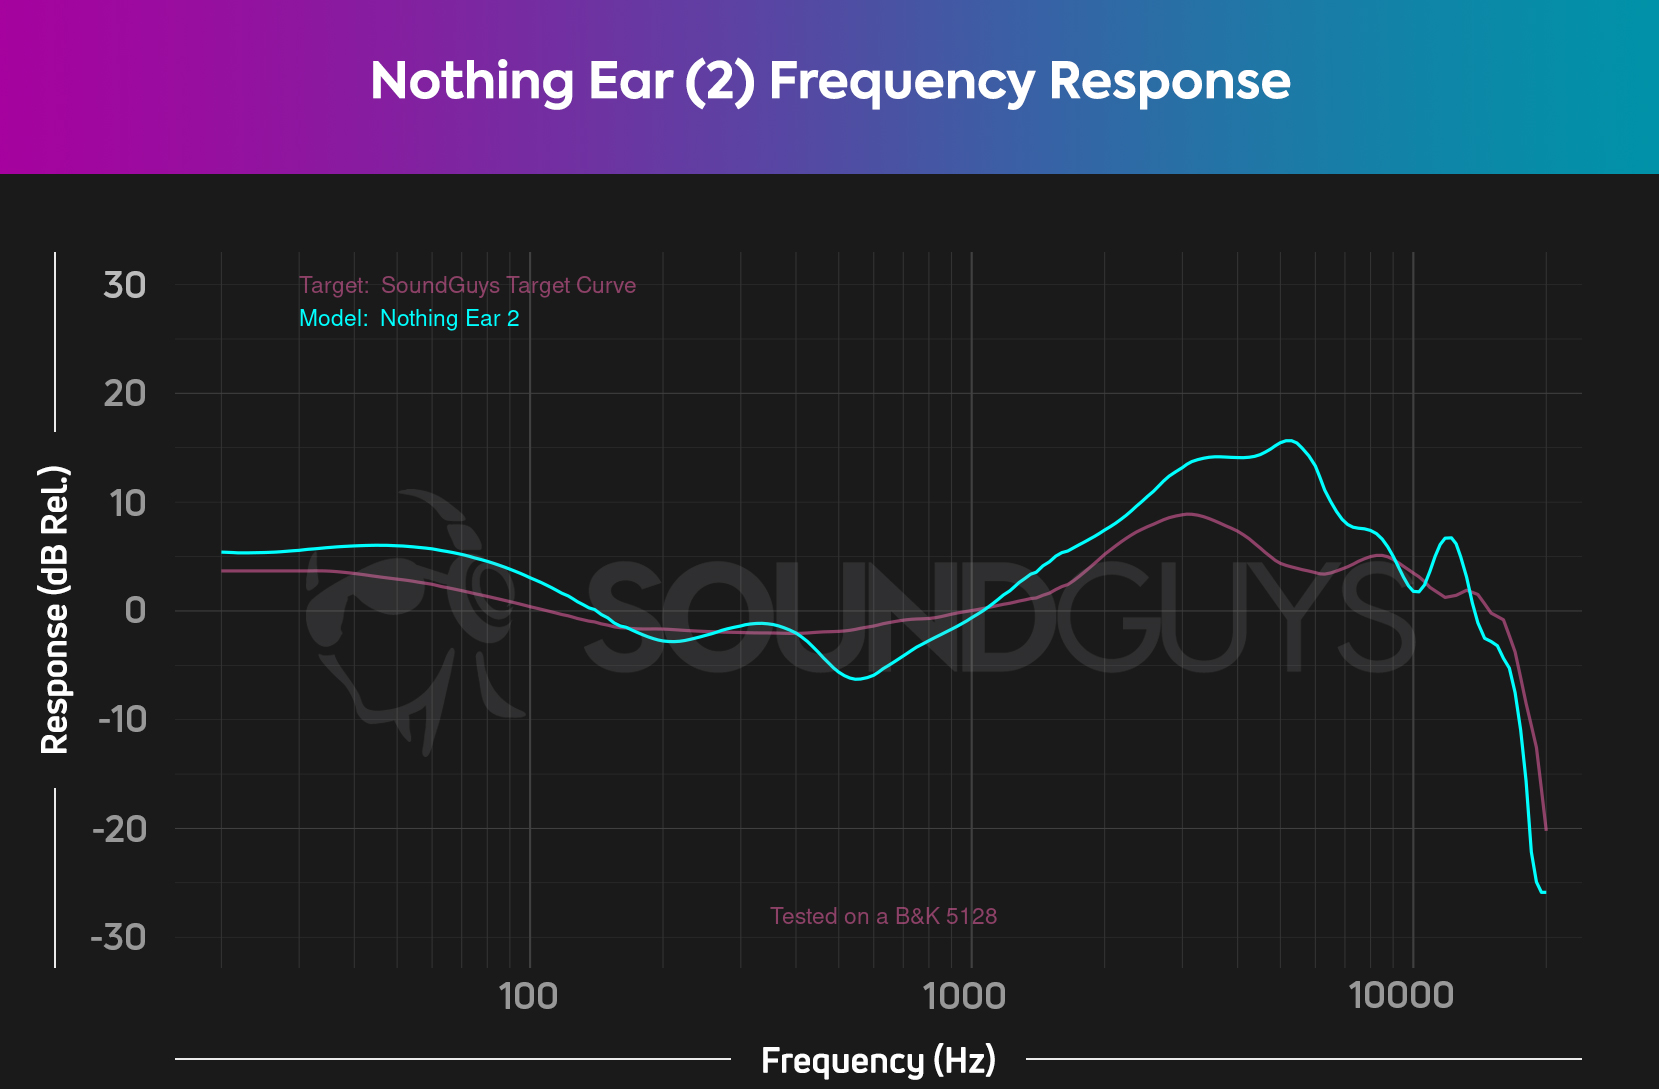 A chart comparing the frequency response of the Nothing Ear (2) with the SoundGuys house curve.